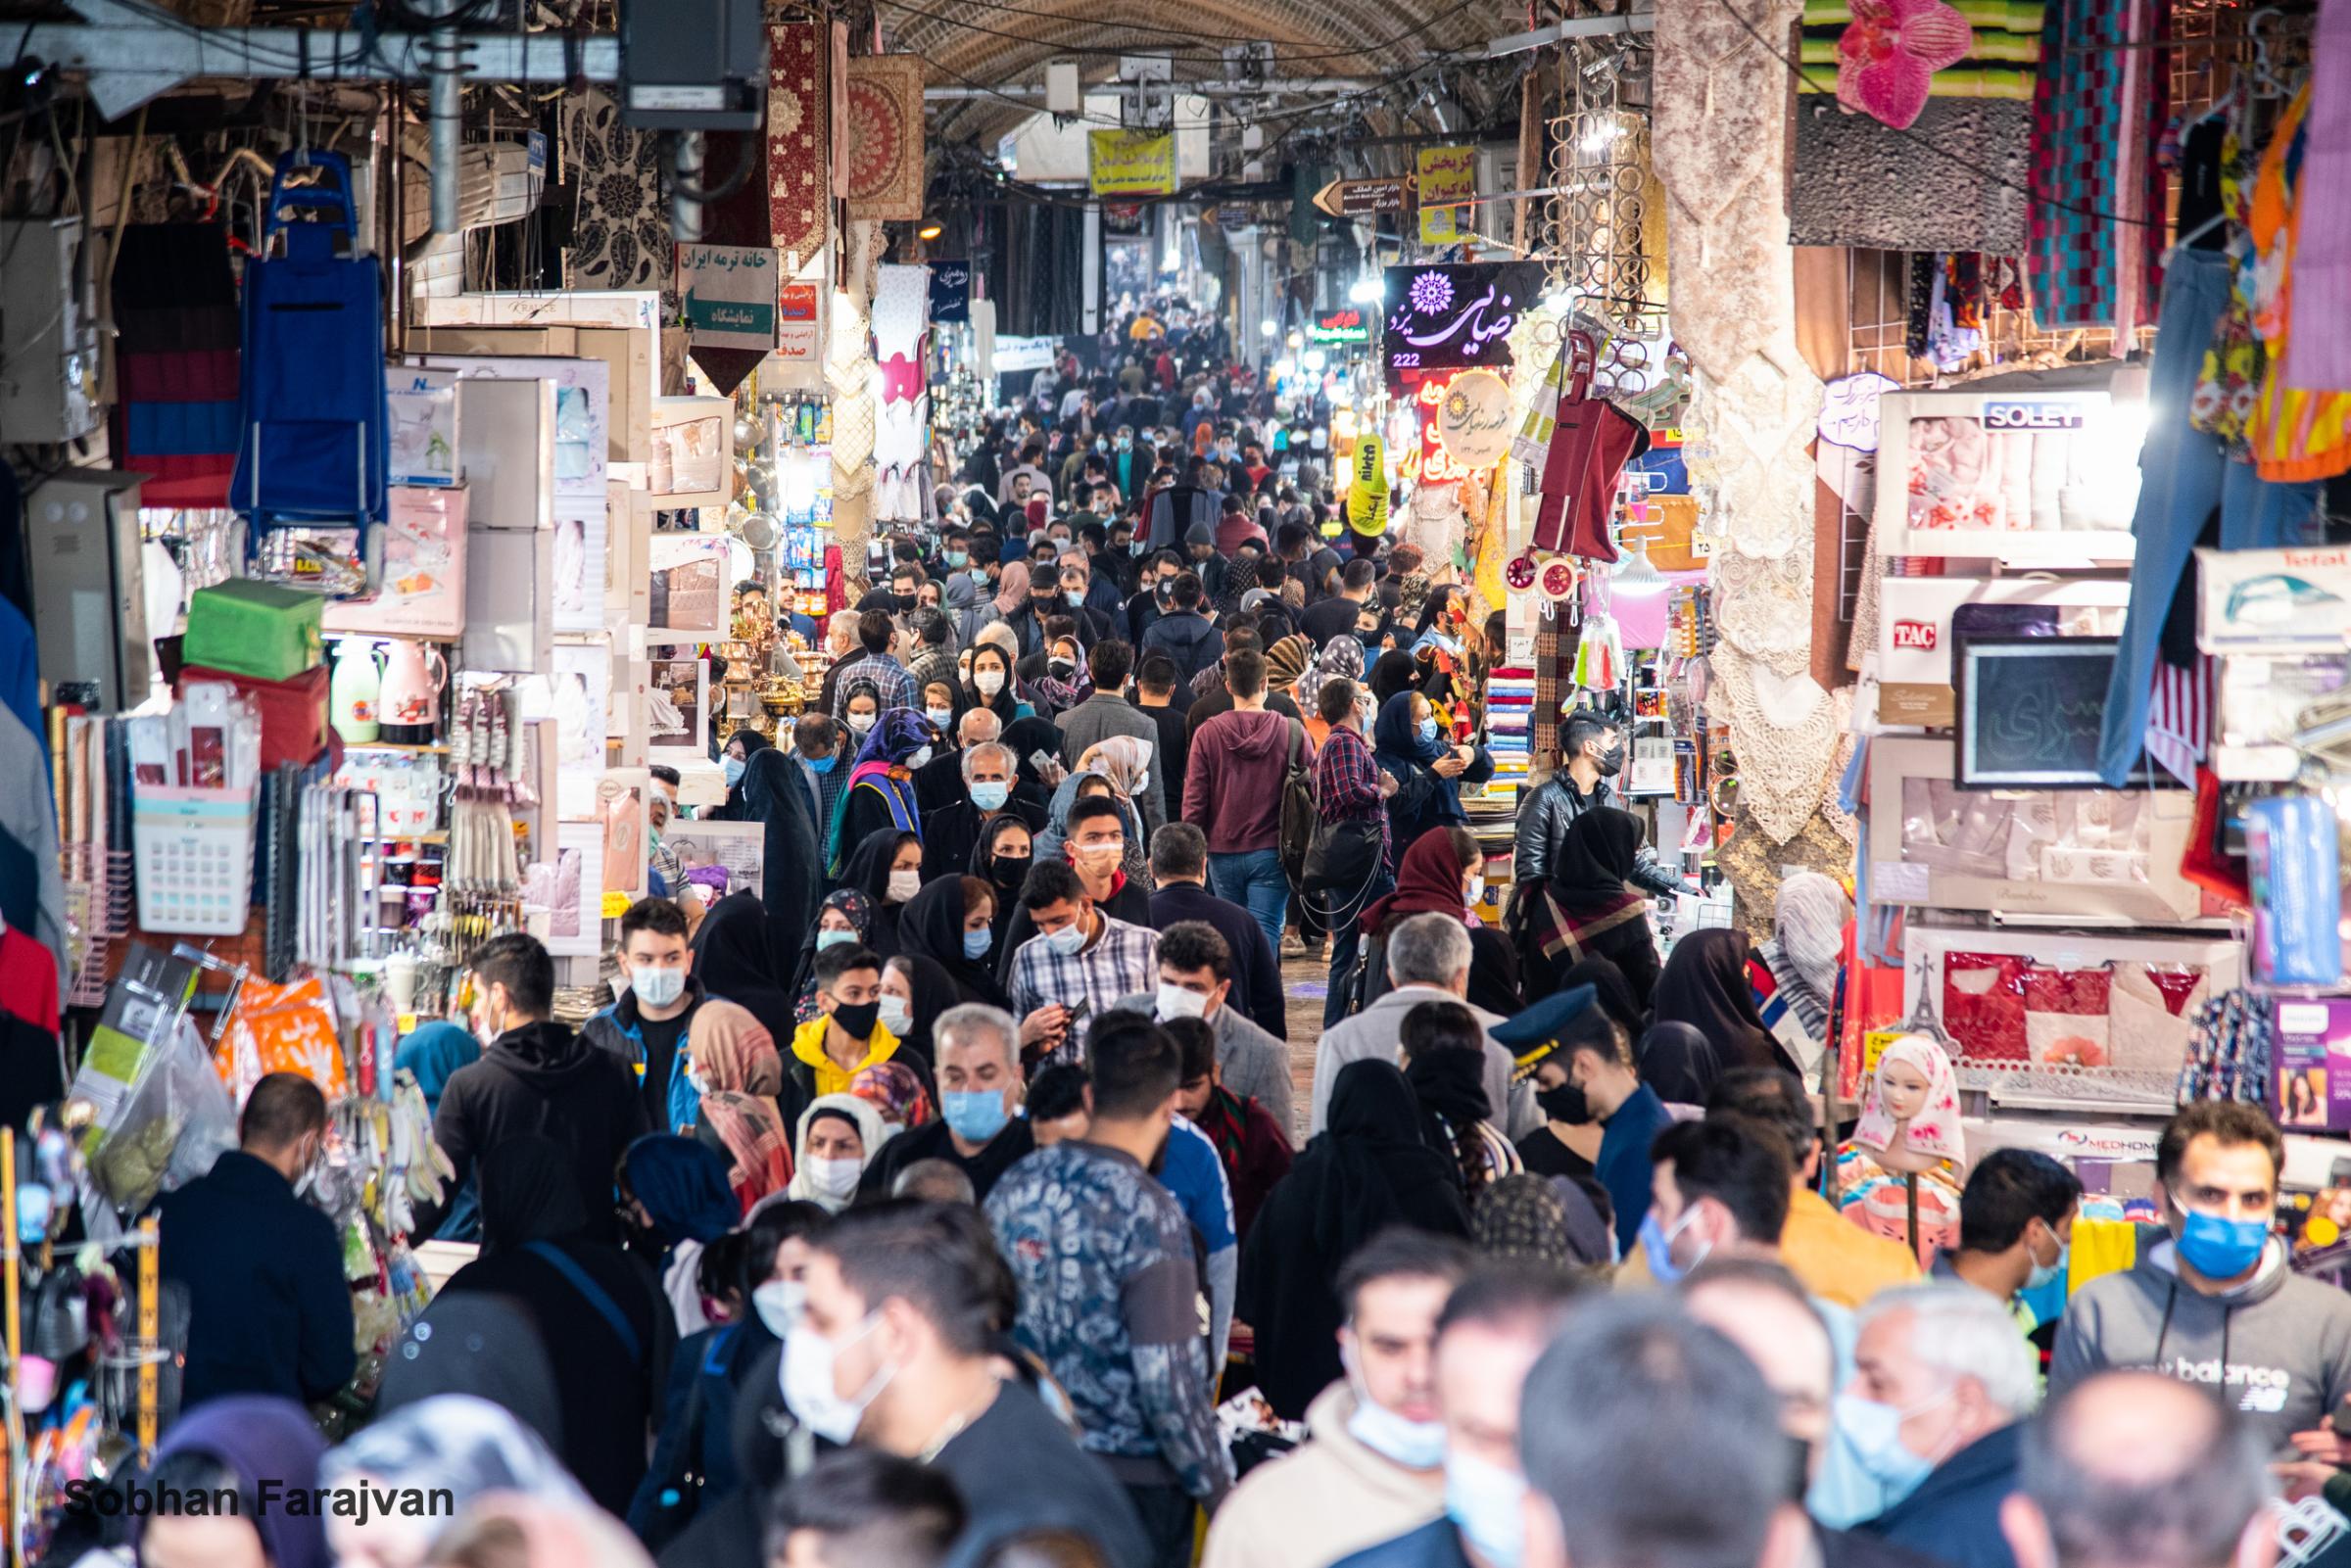 COVID-19 pandemic in Iran (2020-2022) - Crowds of people in Tehran's Grand Bazaar amid the...